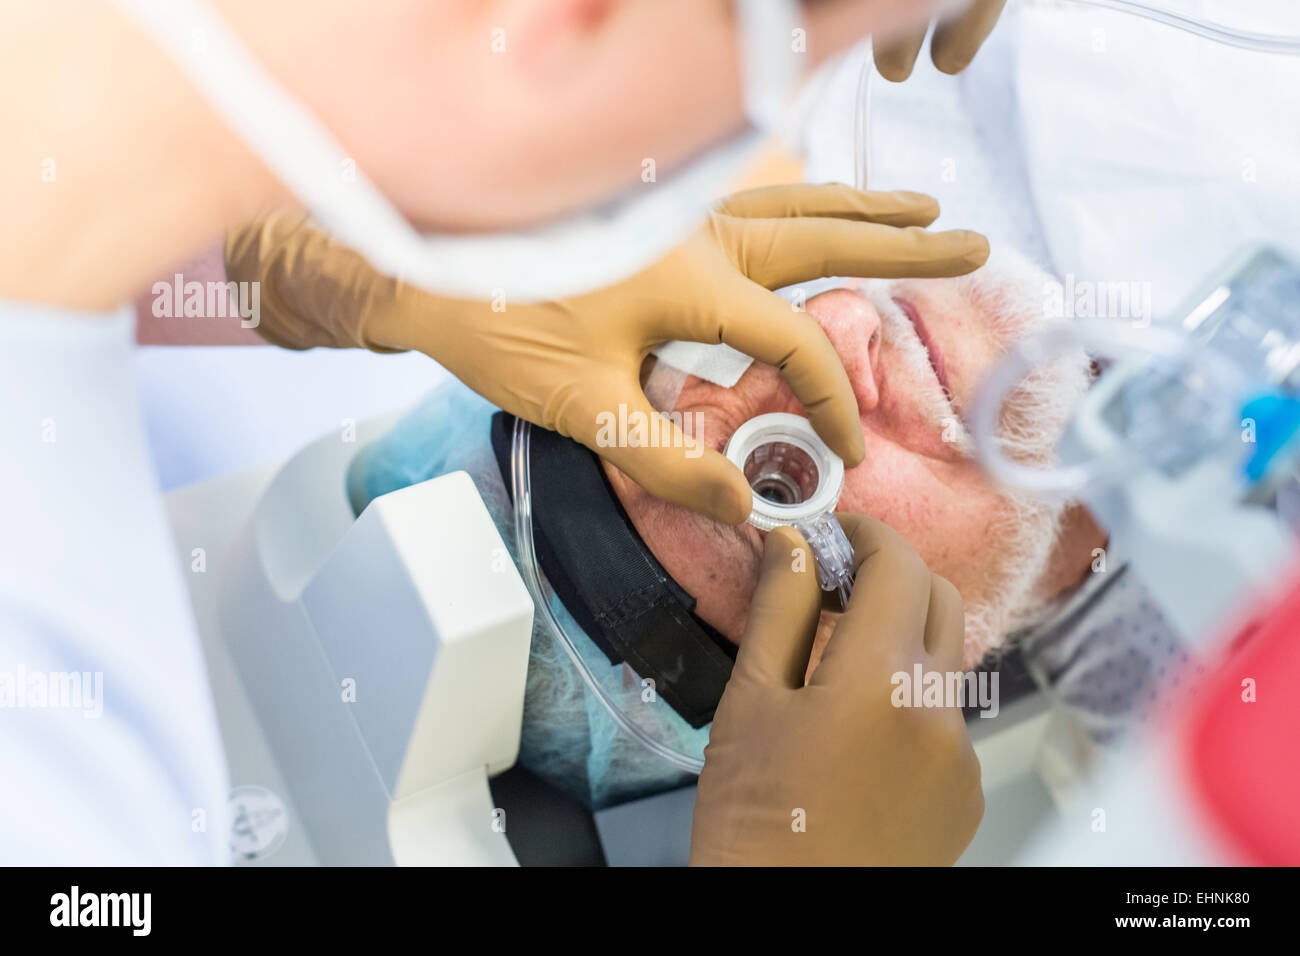 Cataract surgery femtosecond laser. Department of Ophthalmology of Bordeaux hospital, France. Stock Photo